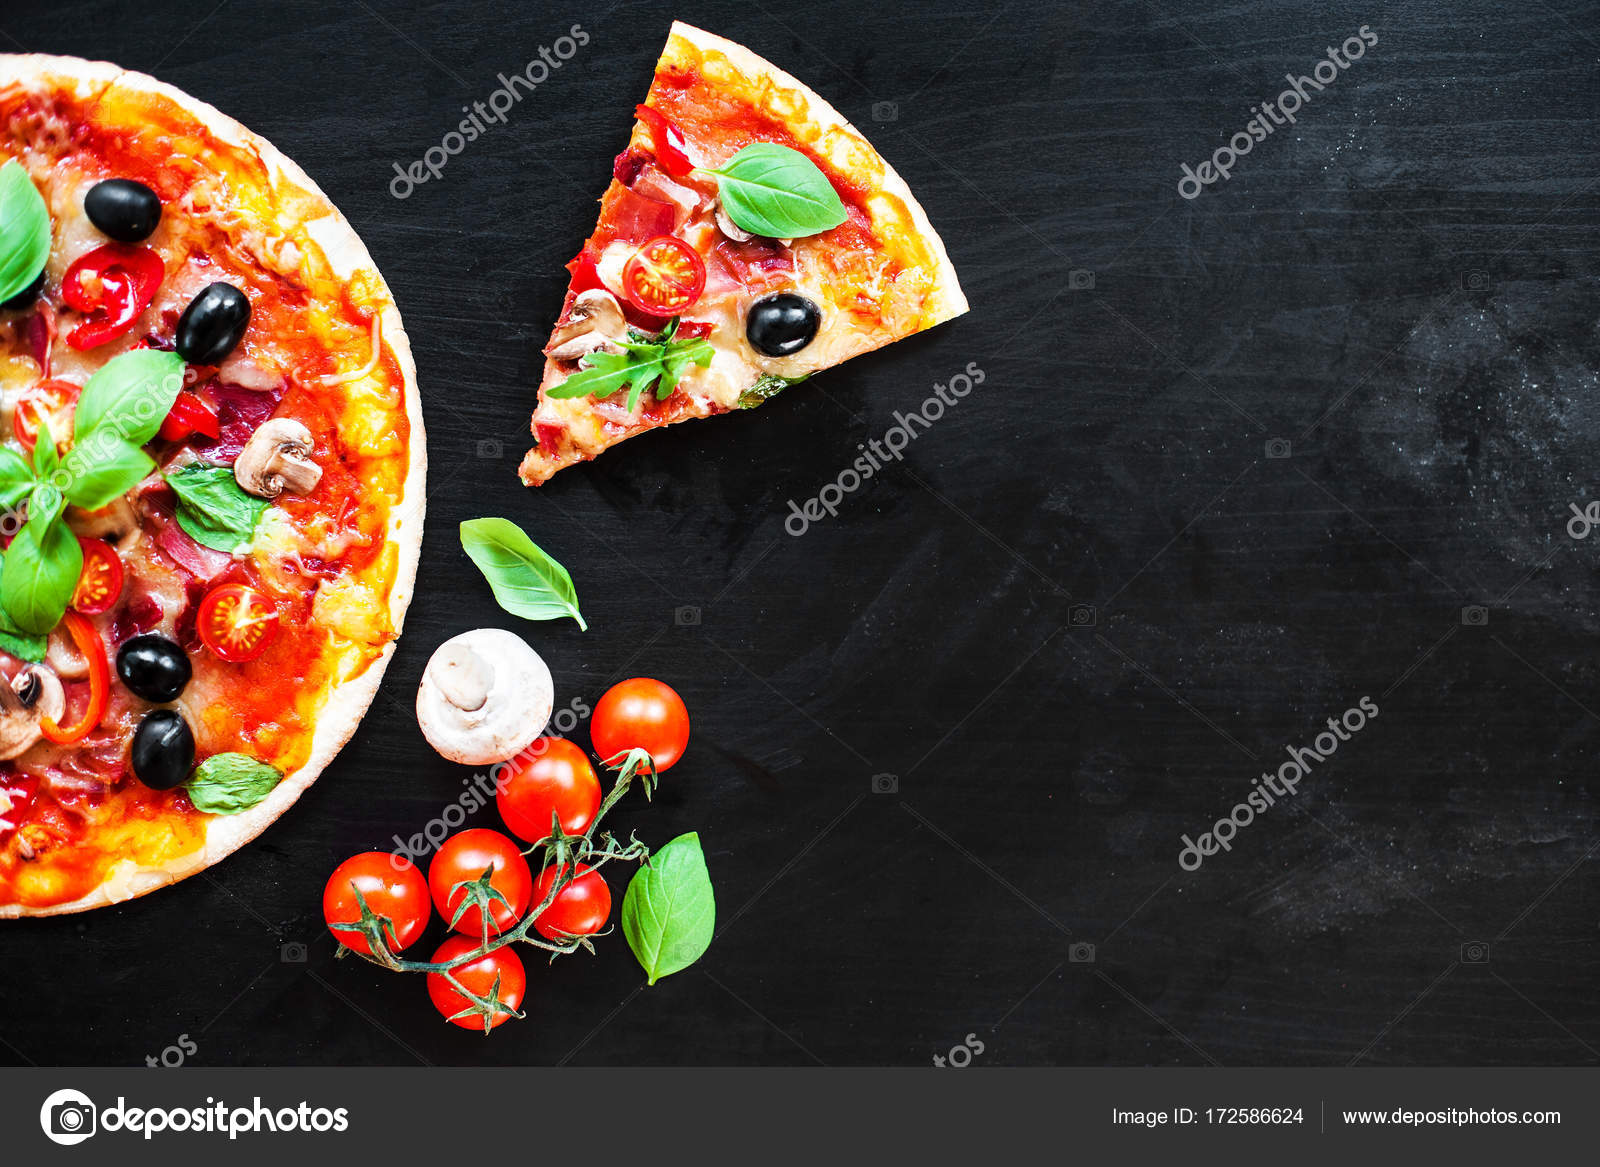 Pizza background Stock Photos, Royalty Free Pizza background Images |  Depositphotos